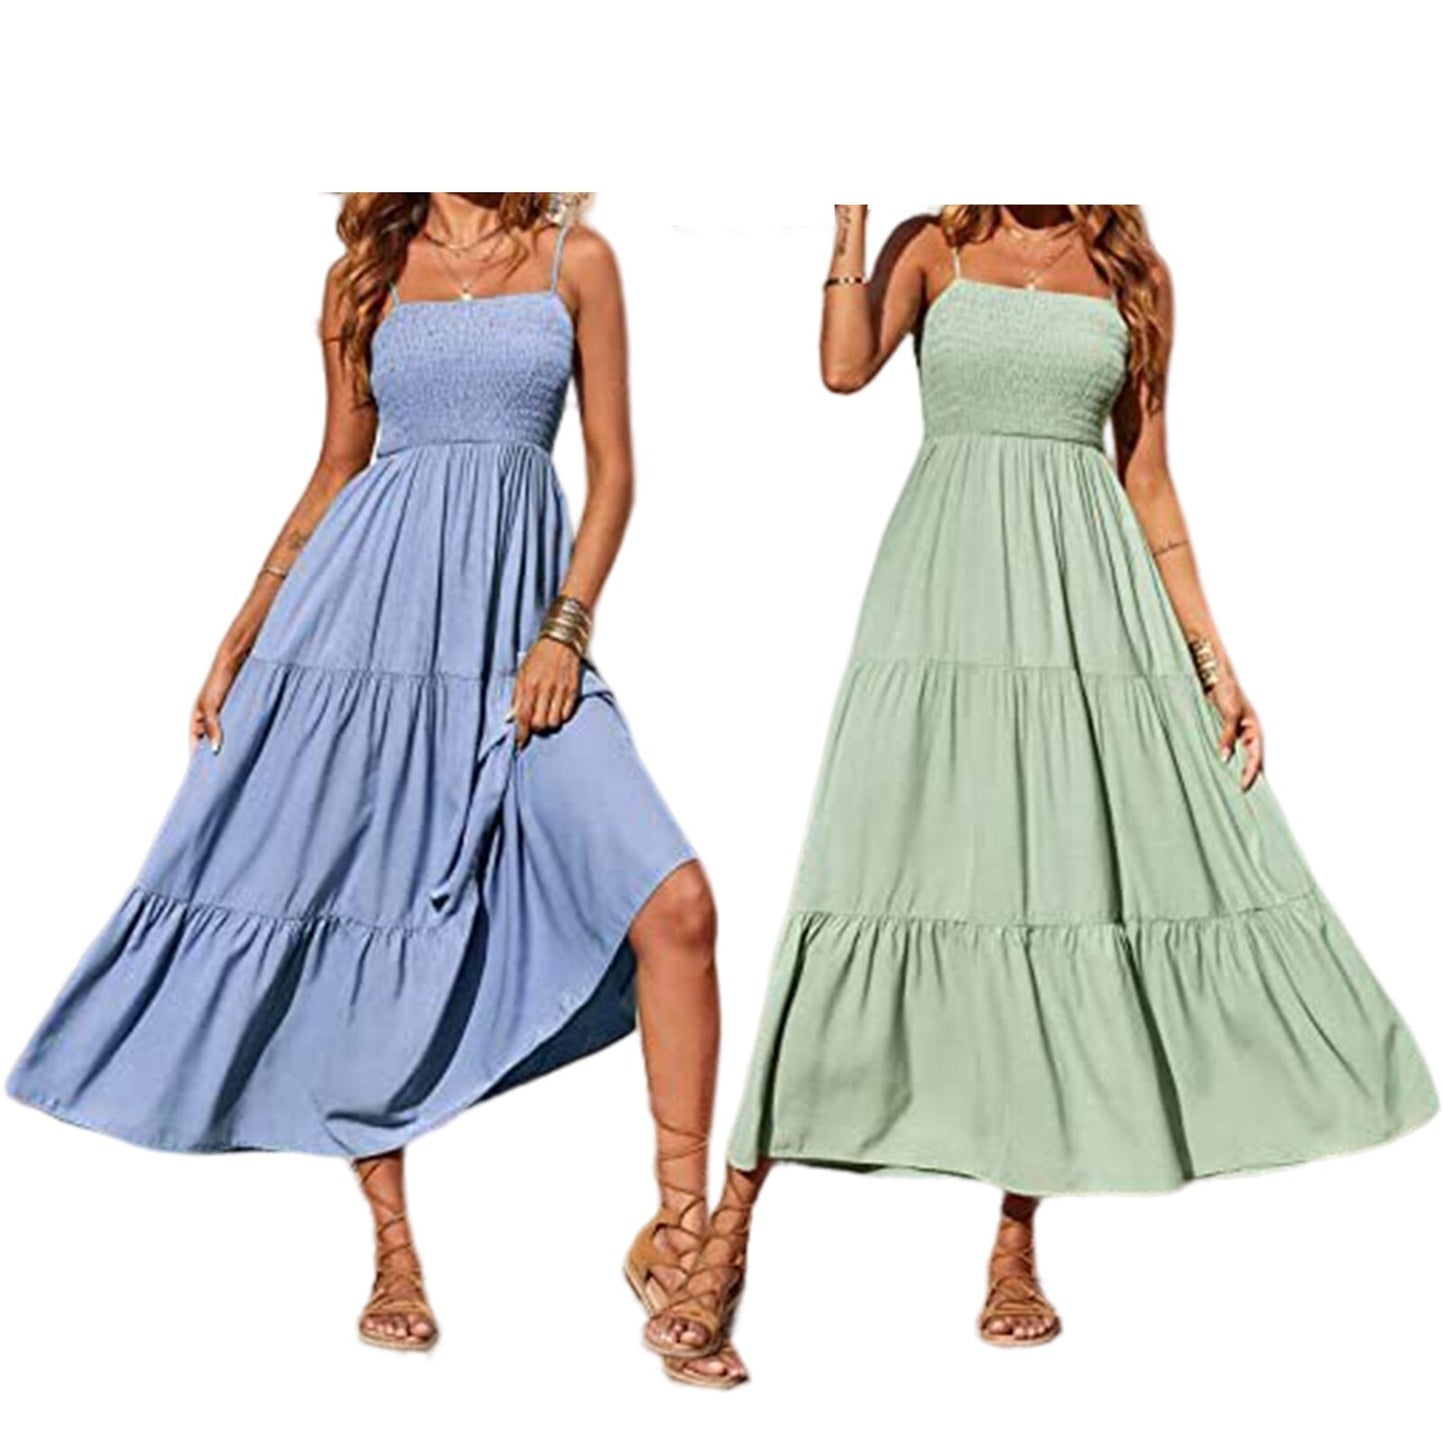 Sexy Long Dress / Slim Fit / Solid Color Dress for Casual or Elegant Summer wear. Tunic Dress in Bohemian Style with A Line Square Neck for Holidays and Vacation.